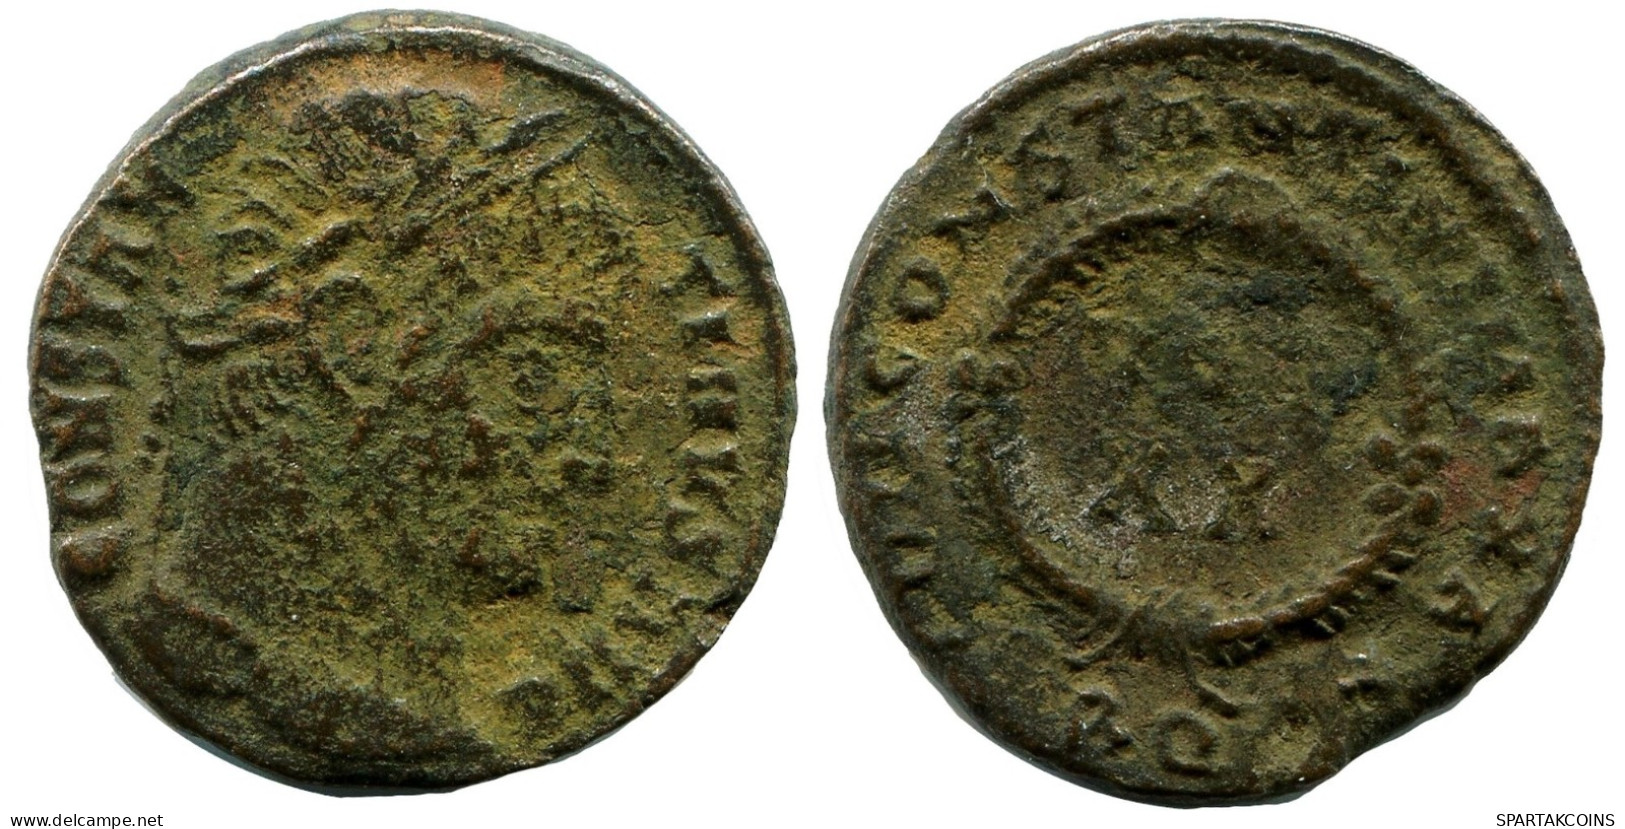 CONSTANTINE I MINTED IN ROME ITALY FROM THE ROYAL ONTARIO MUSEUM #ANC11176.14.E.A - El Imperio Christiano (307 / 363)